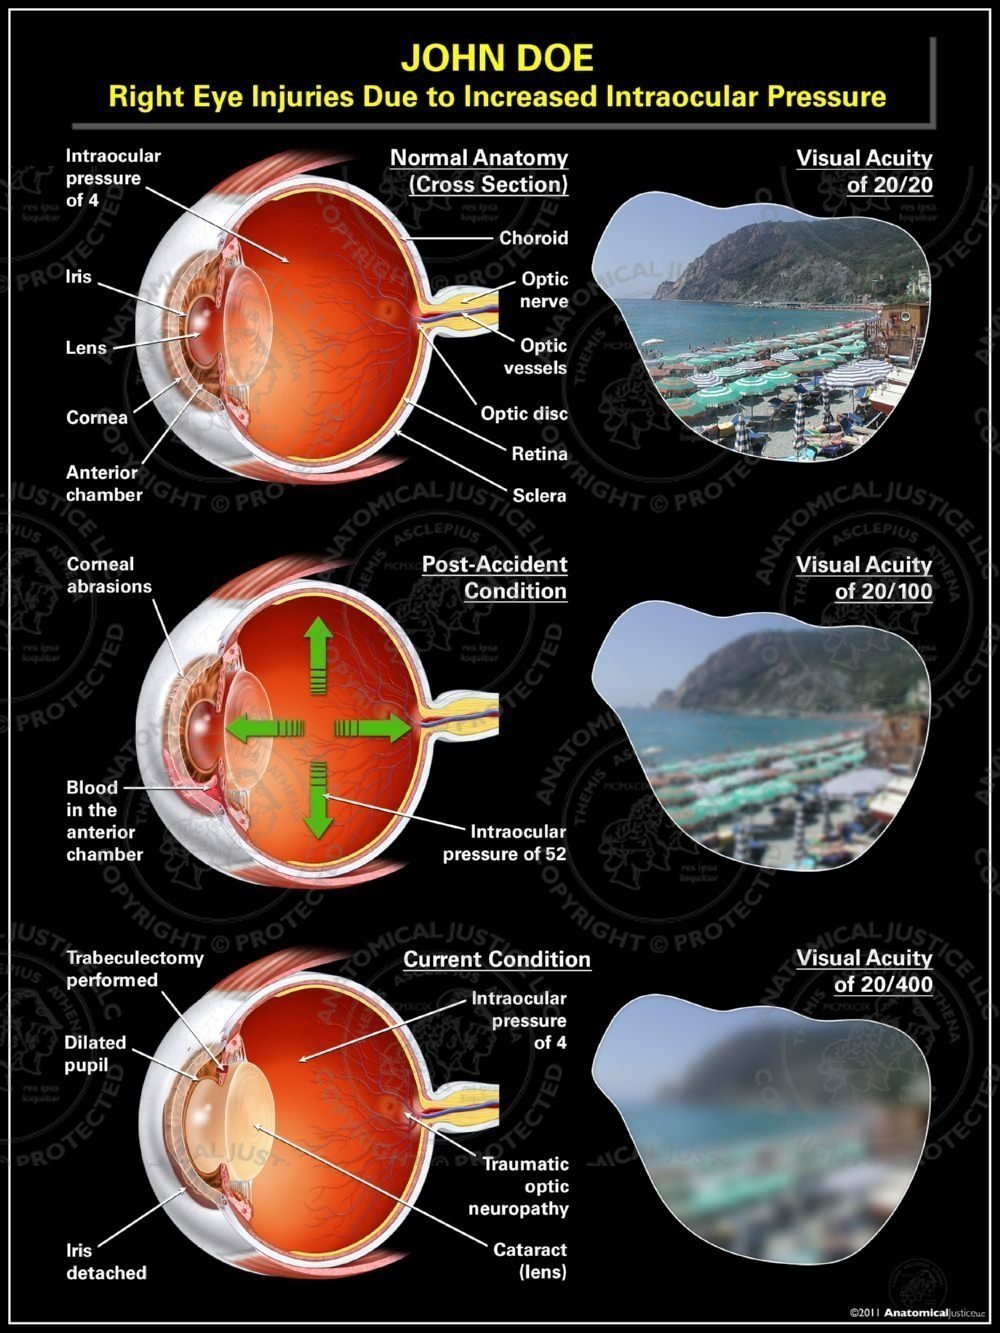 Right Eye Injuries Due to Increased Intraocular Pressure